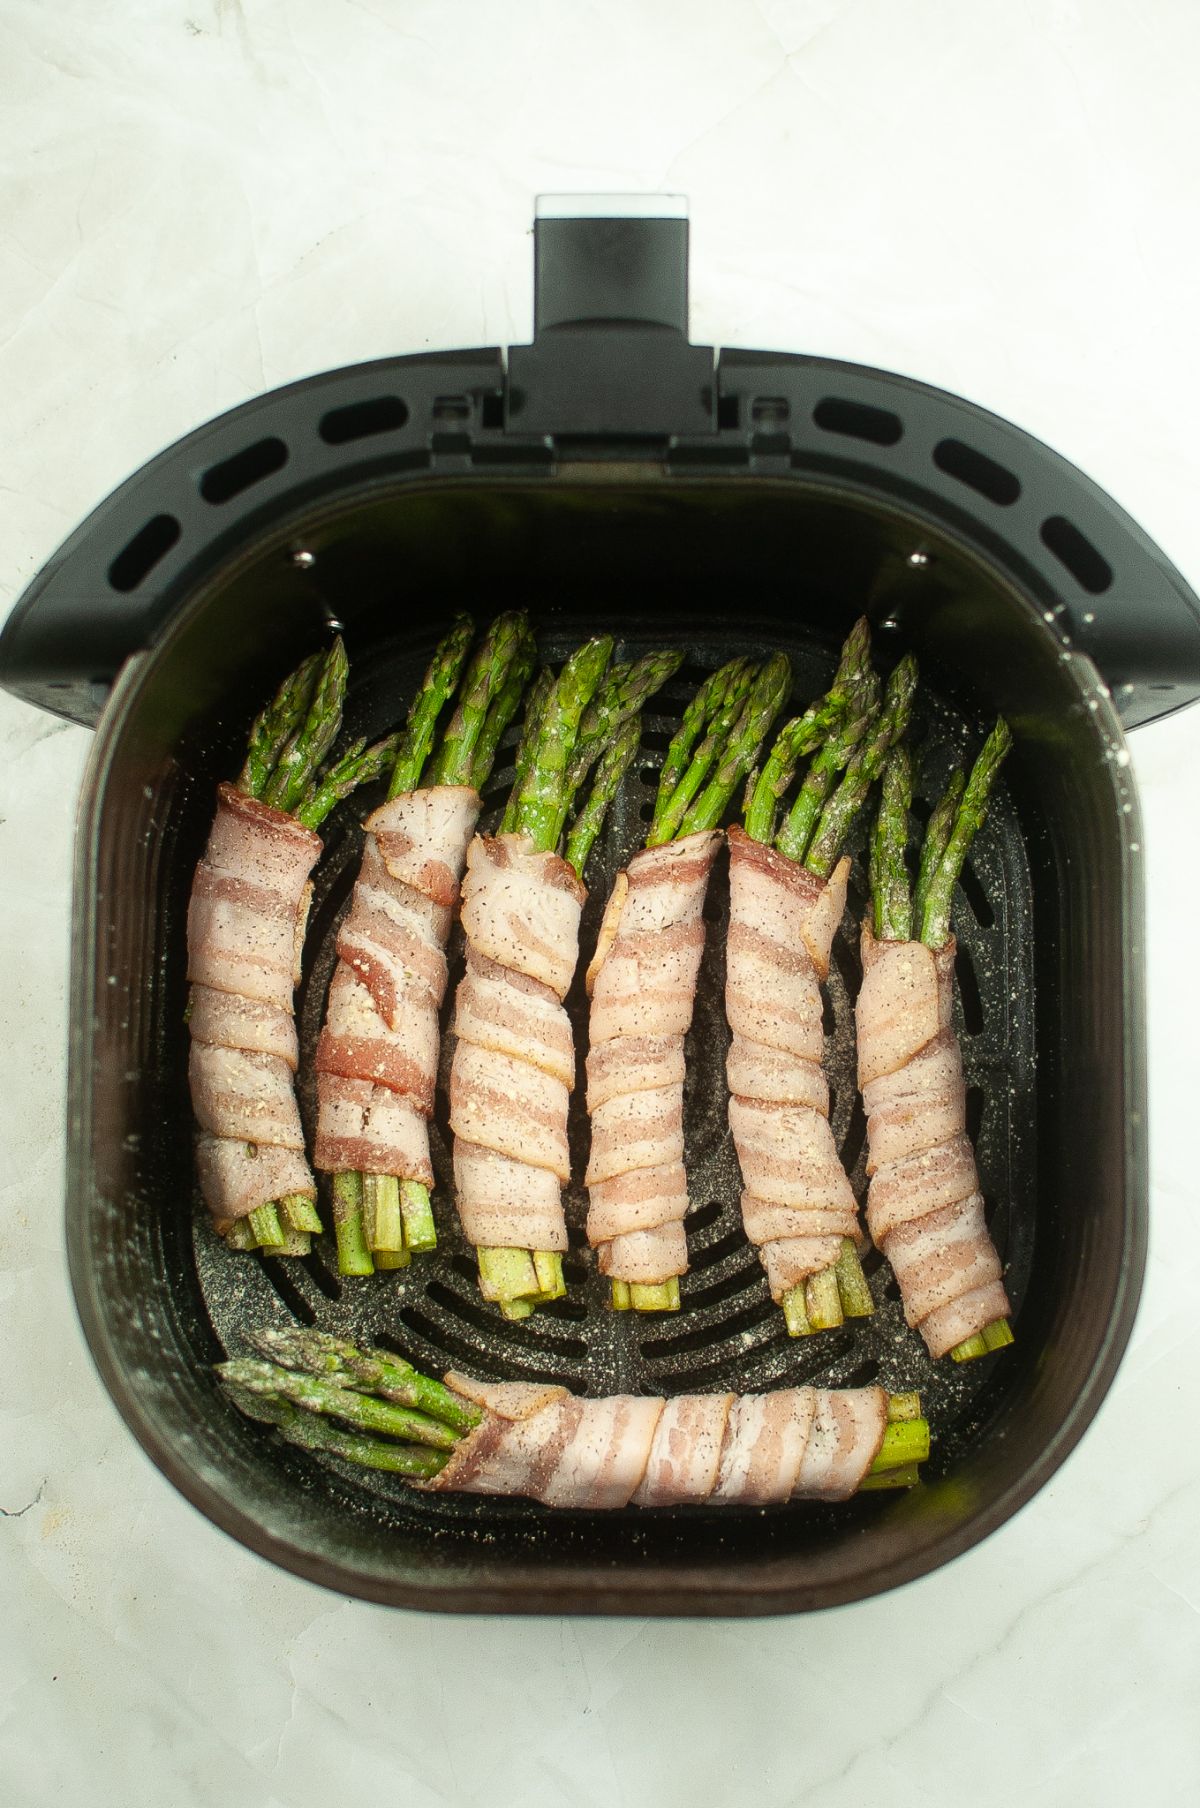 Bacon Wrapped Asparagus with seasoning inside the Air Fryer.